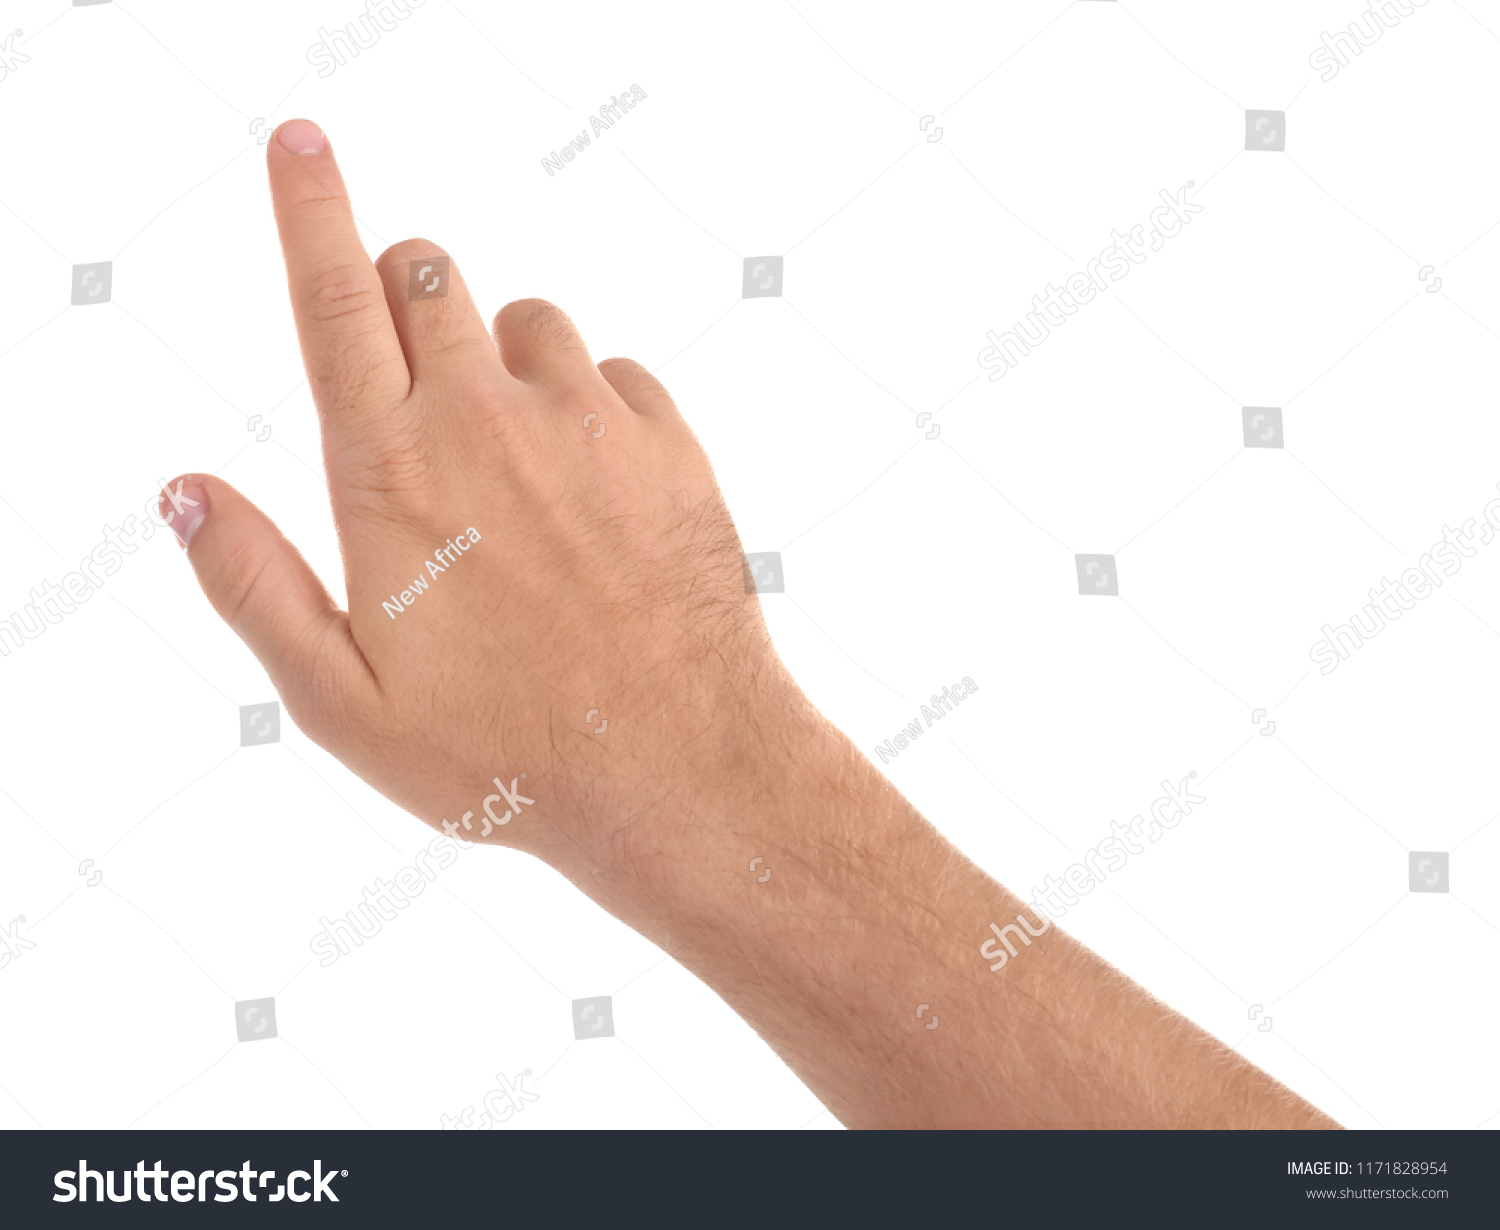 Abstract young man's hand on white background #1171828954